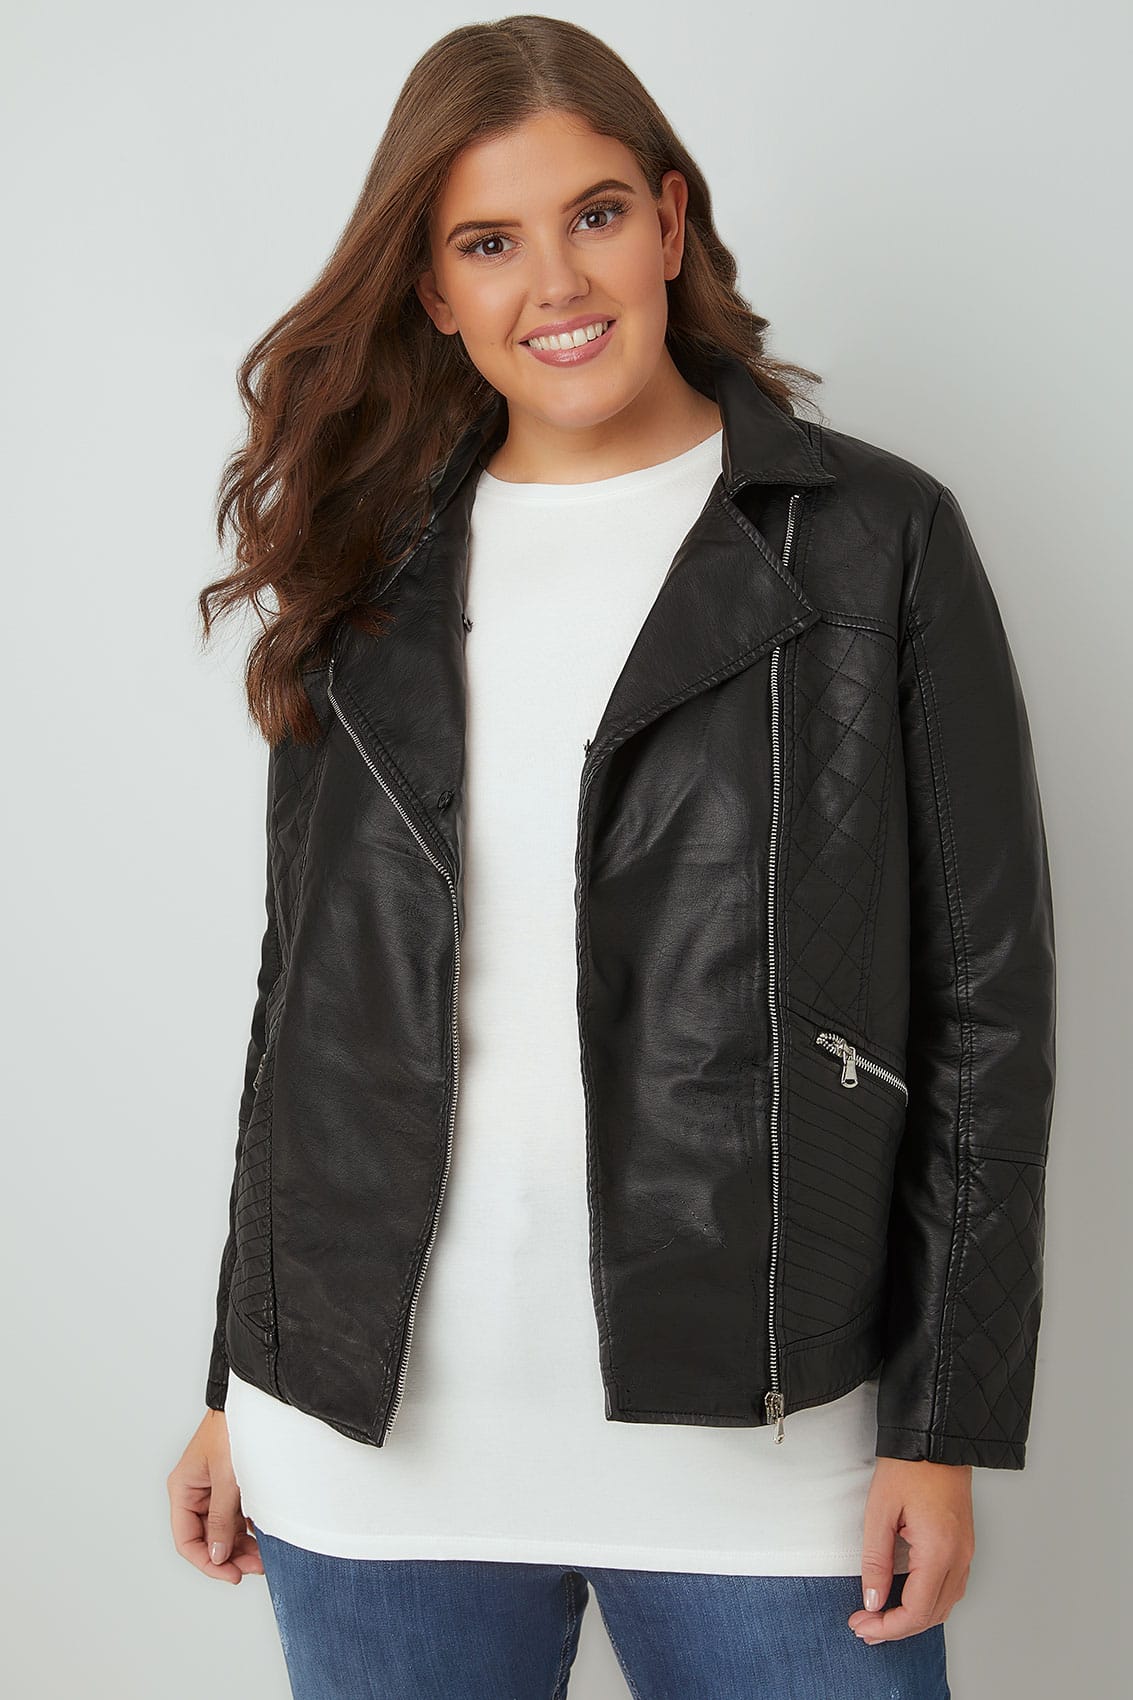 Black PU Leather Look Biker Jacket With Faux Fur Collar, Plus size 16 to 36